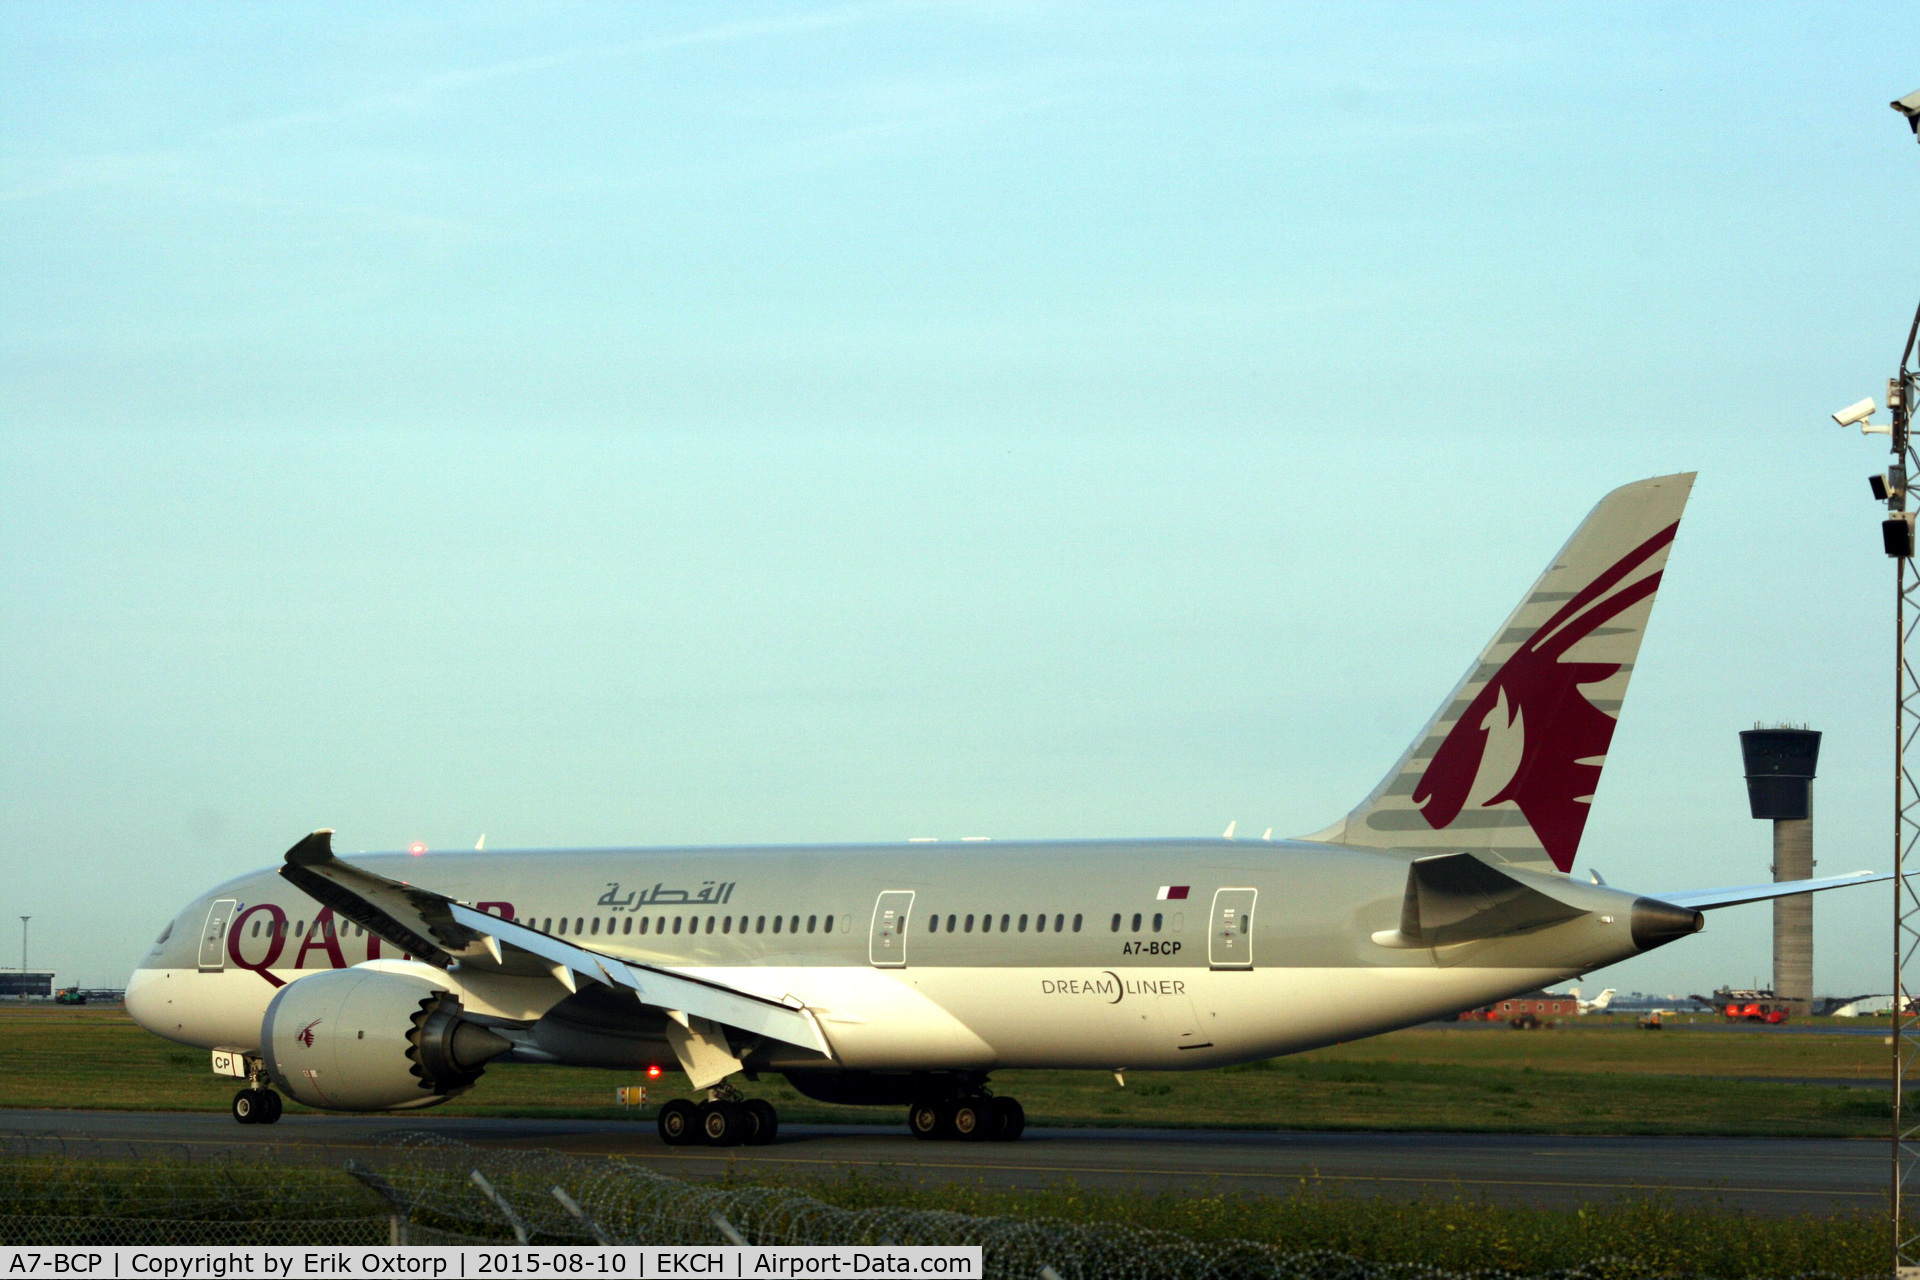 A7-BCP, 2014 Boeing 787-8 Dreamliner C/N 38334, A7-BCP just arrived rw 04L